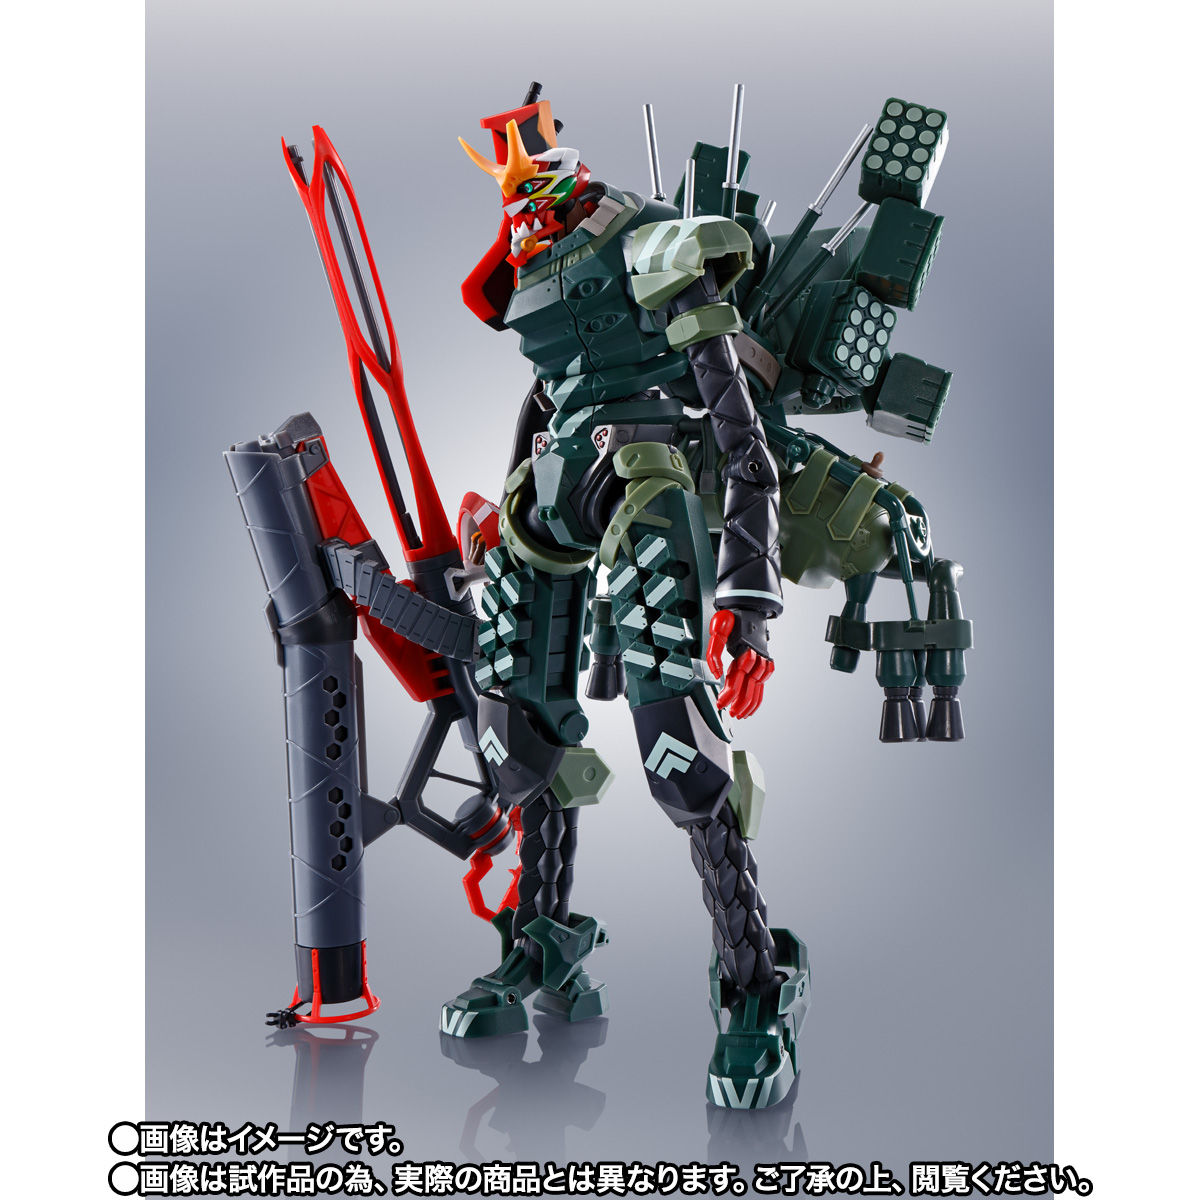 Robot Spirits(Side EVA) R-SP Multipurpose Humanoid Decisive Weapon,Artificial Human Evangelion New Production Model-02 α(JA-02 Body Assembly Cannibalized)